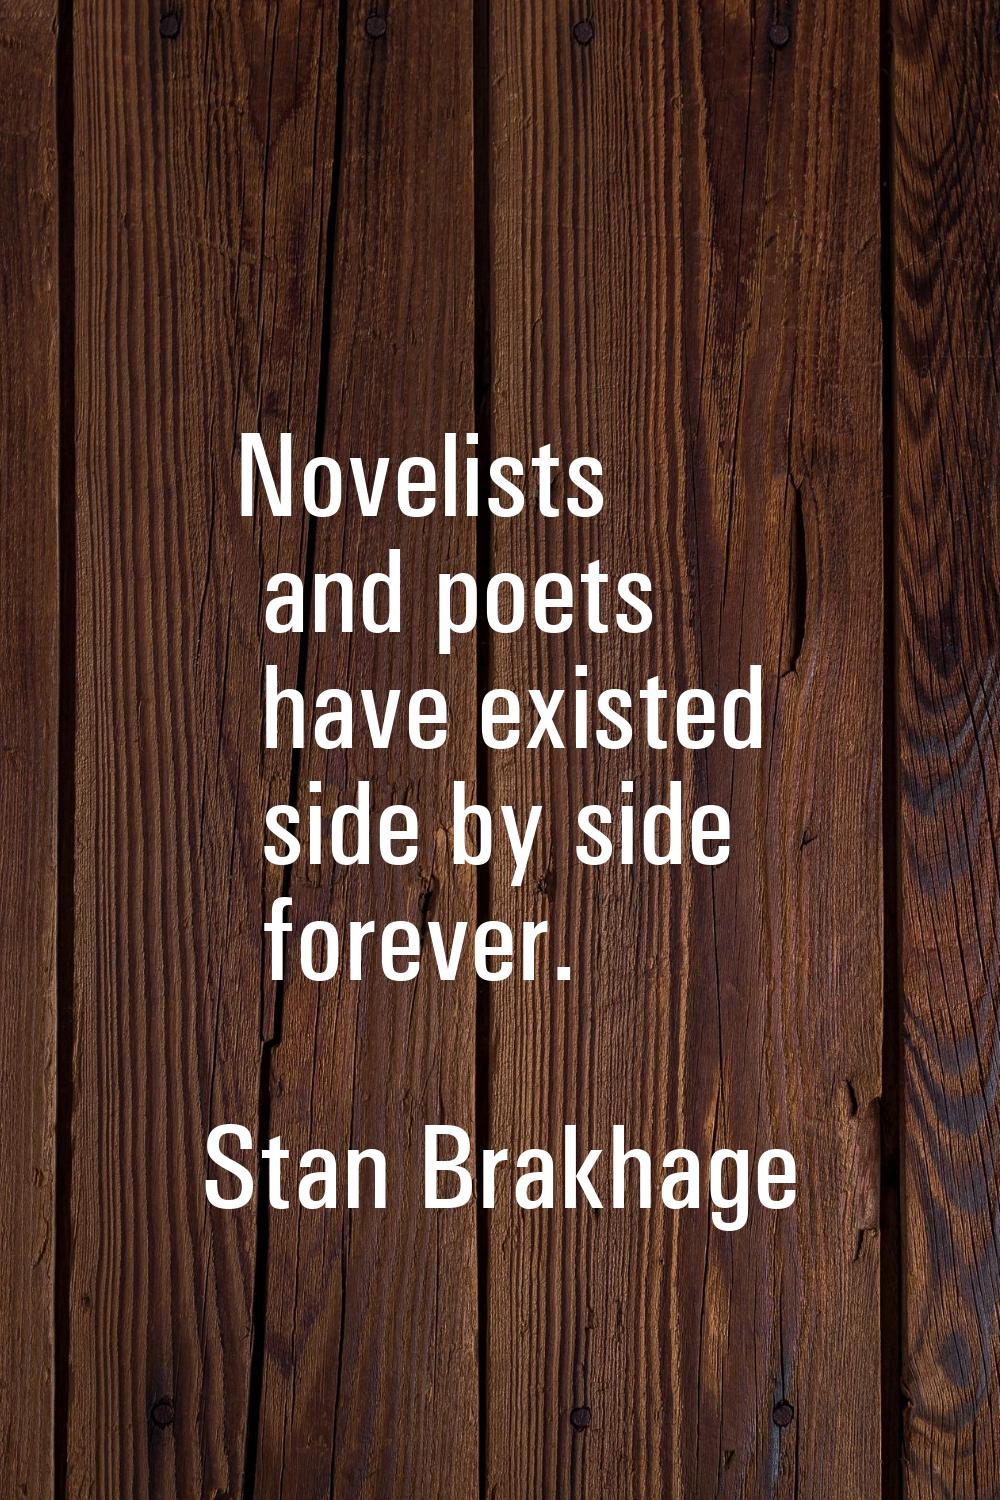 Novelists and poets have existed side by side forever.